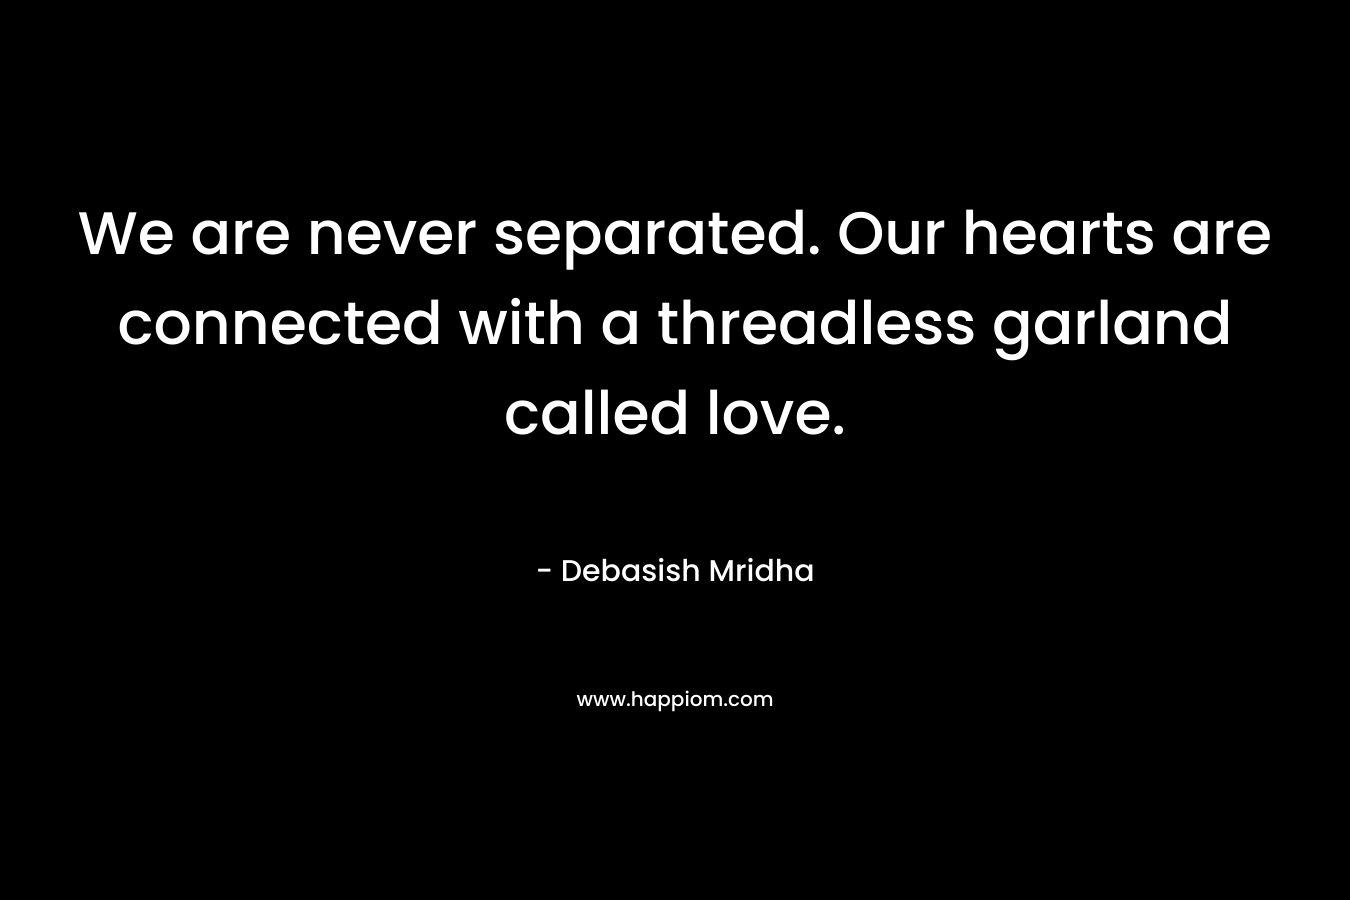 We are never separated. Our hearts are connected with a threadless garland called love. – Debasish Mridha